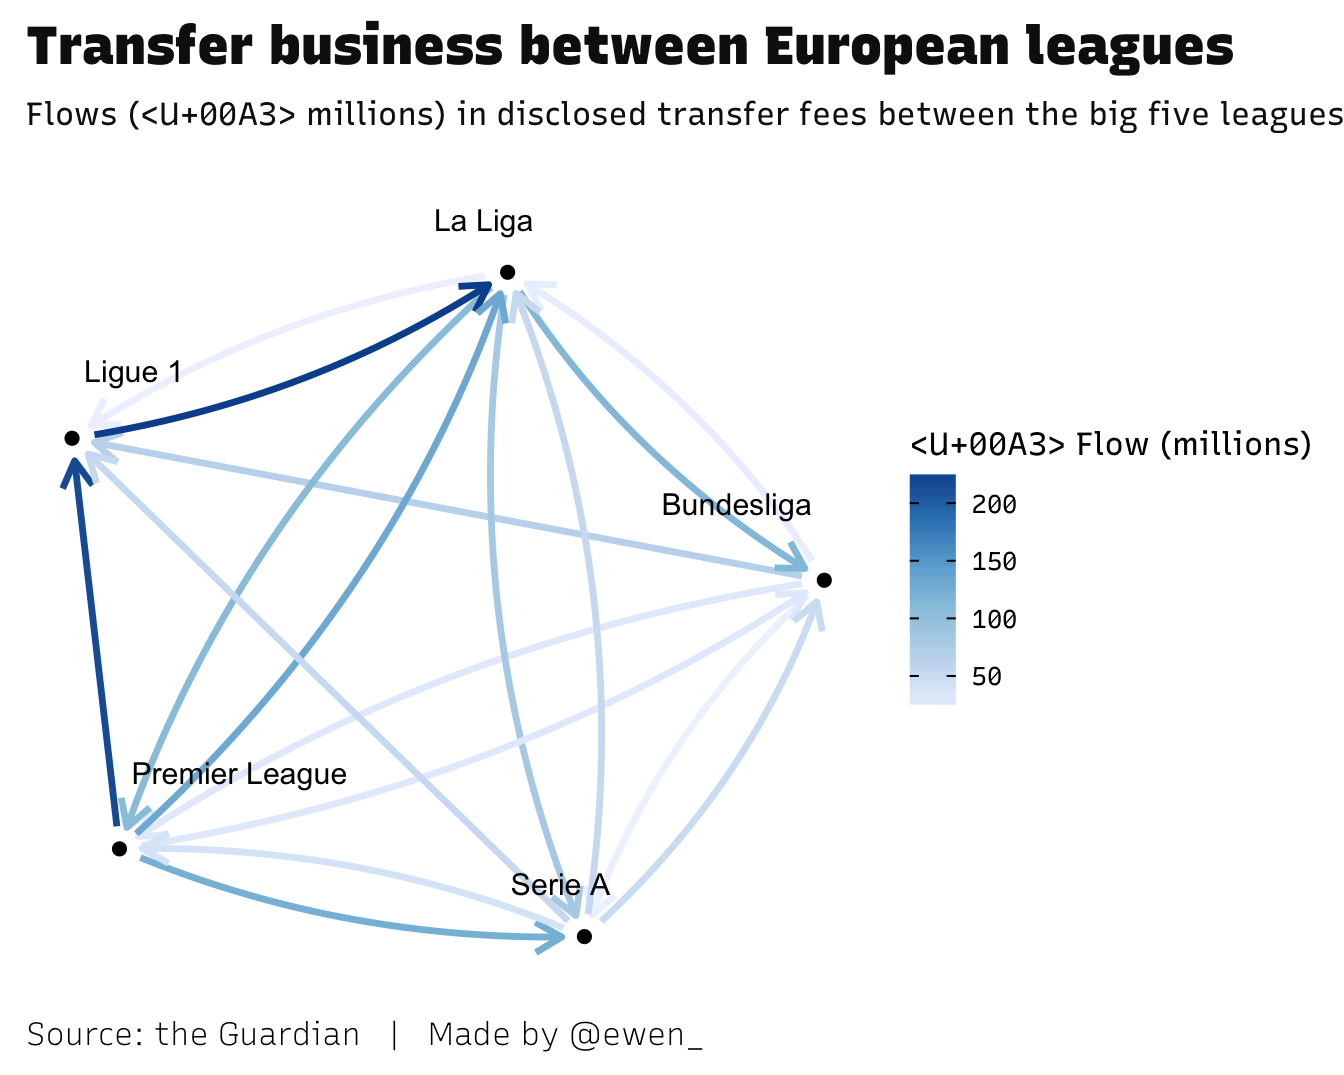 Chart showing flows of transfer spend between big five European leagues